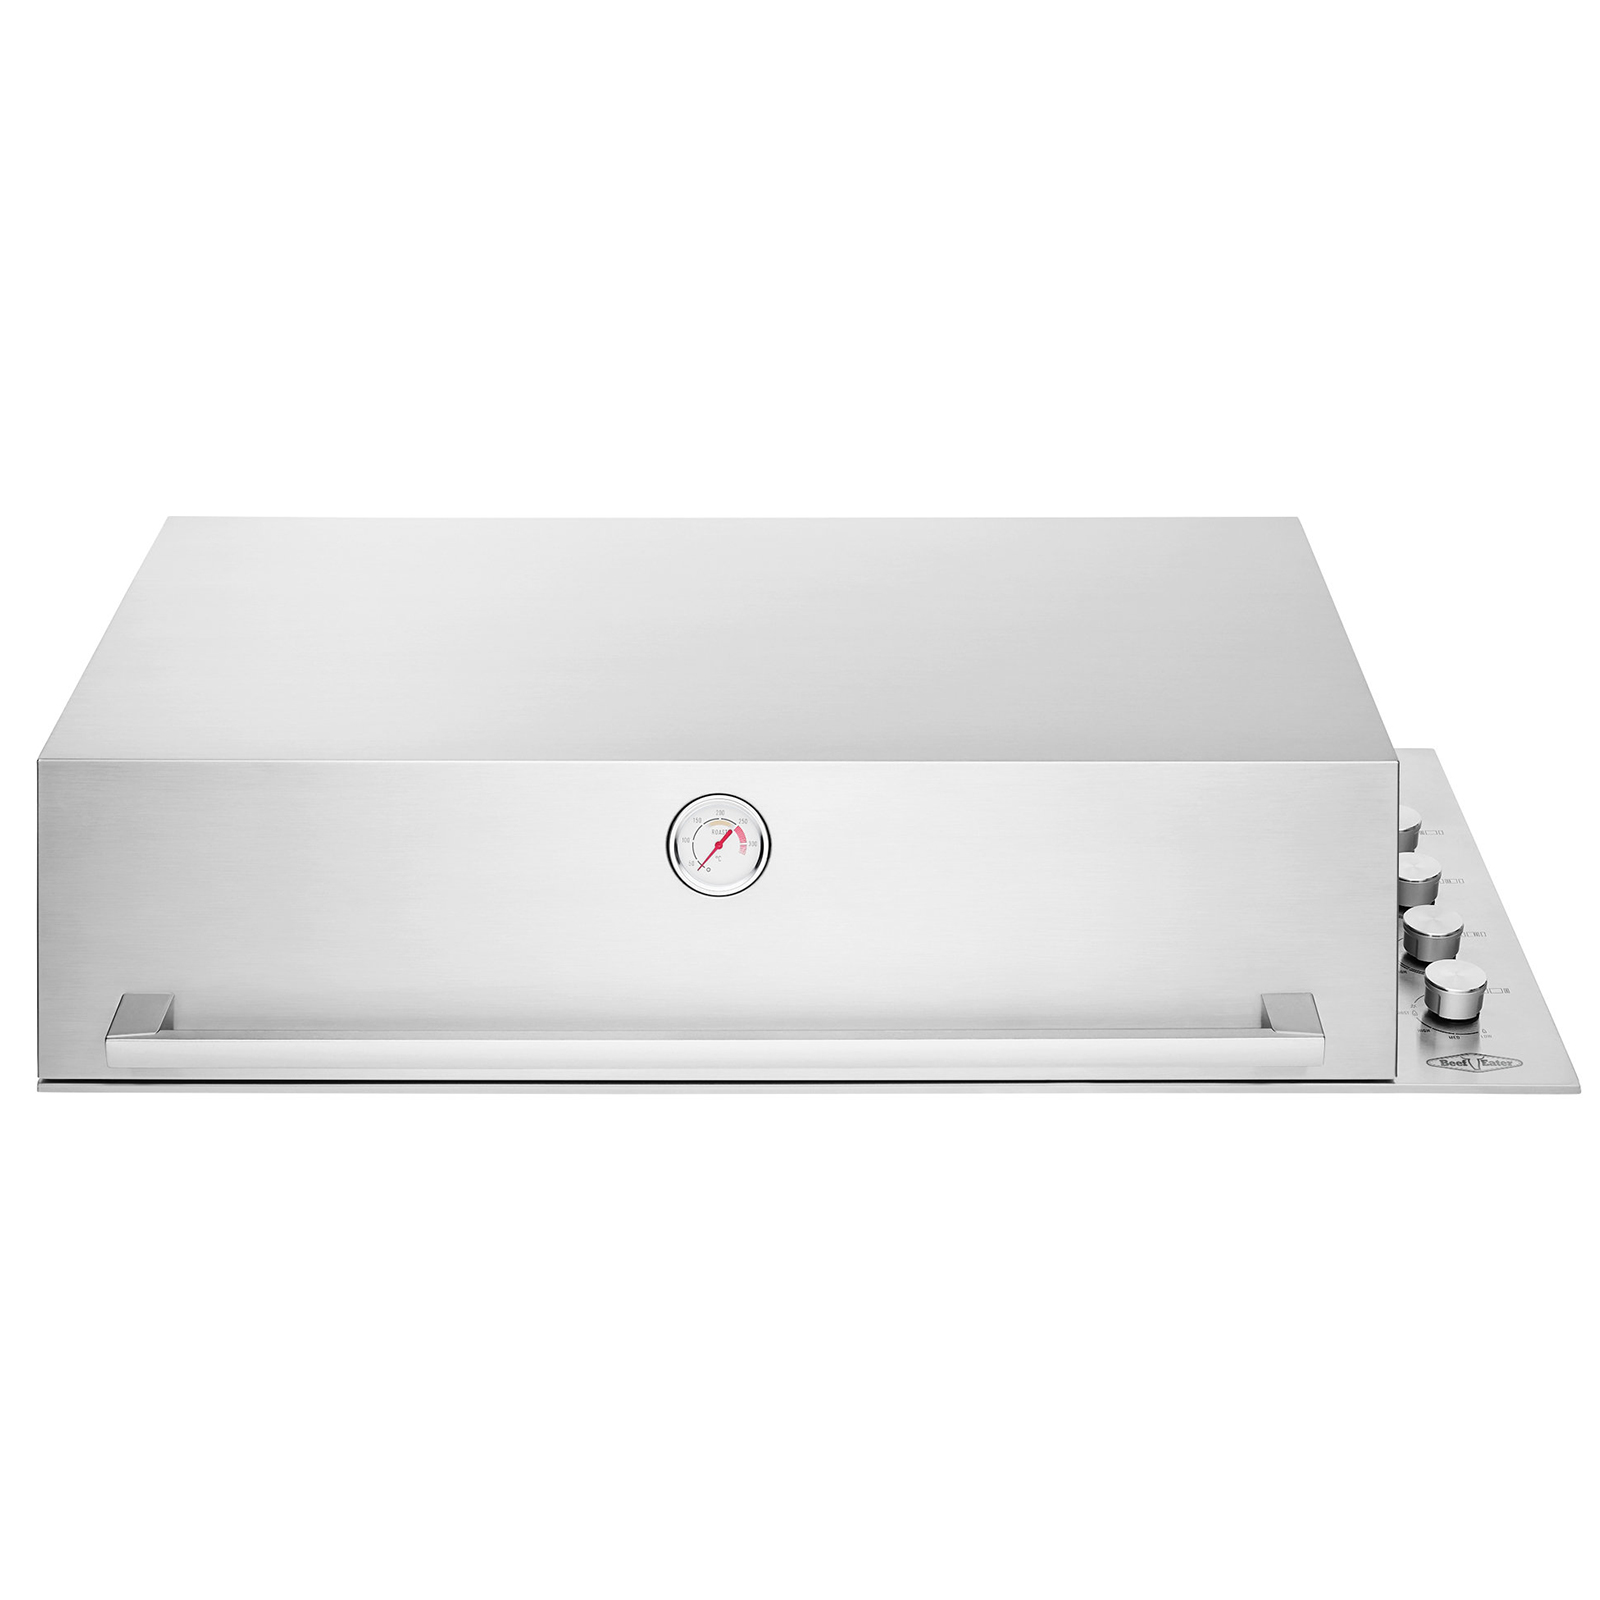 Signature ProLine Stainless Steel Integrated 6 Burner Built in BBQ w/ Hood, SS Burners & Grills - BSH158SA